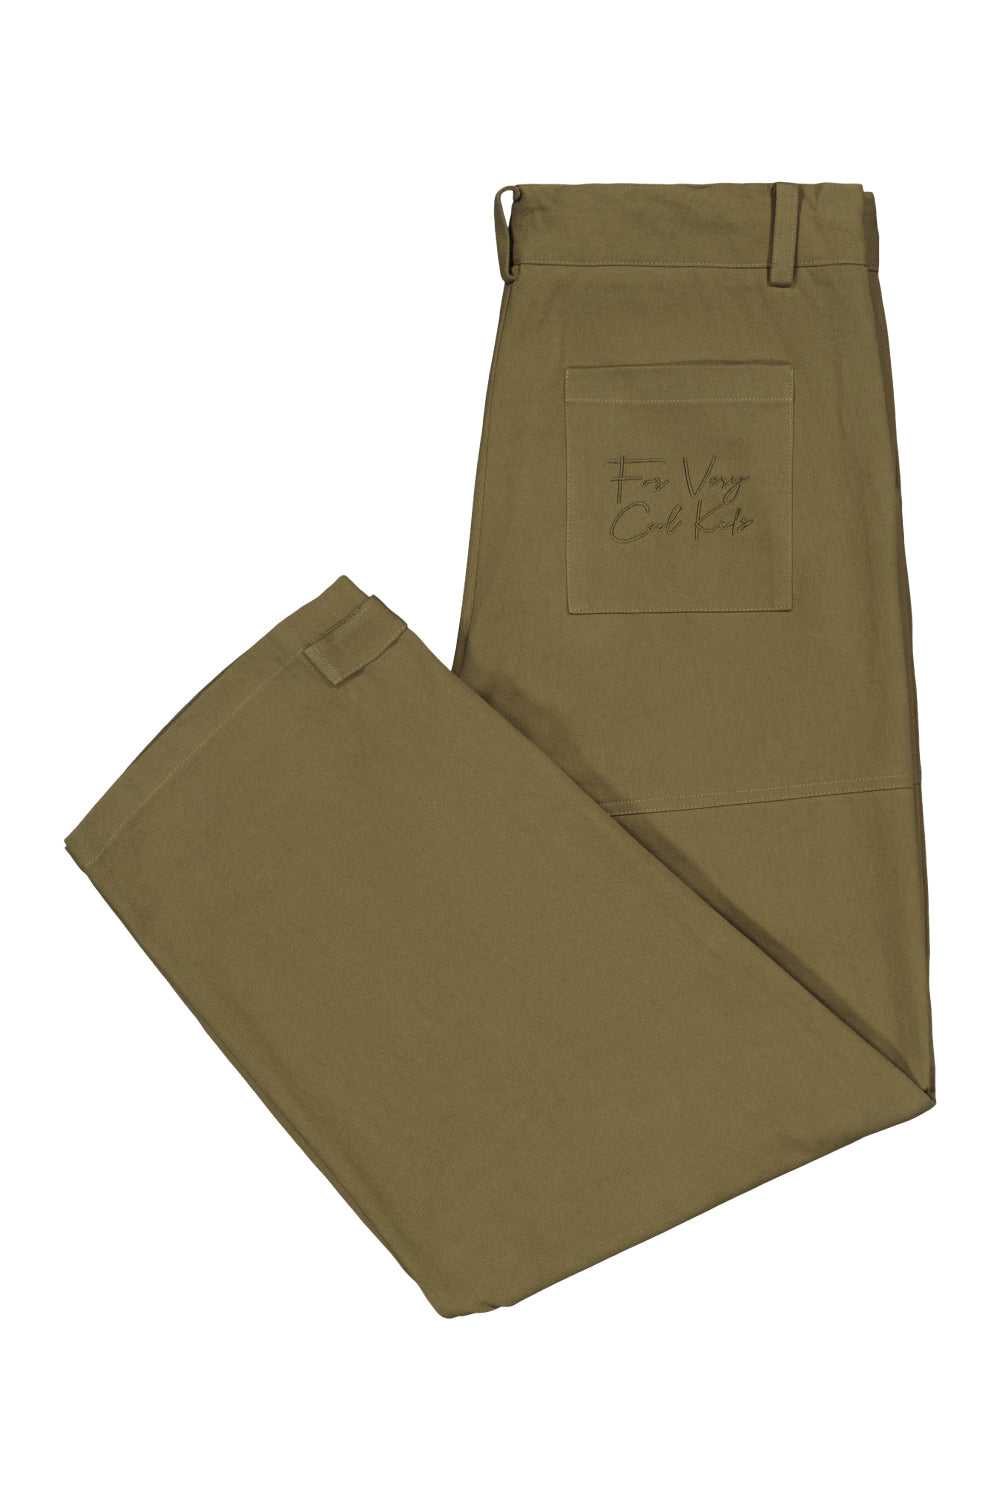 cargo pant - khaki - military green - cargo - for very cool kids - fvck - fvck clothing - baggy pant - baggy cargo - streetwear - tiktok streetwear - tiktok brand - green -  cargo france - catgo paris